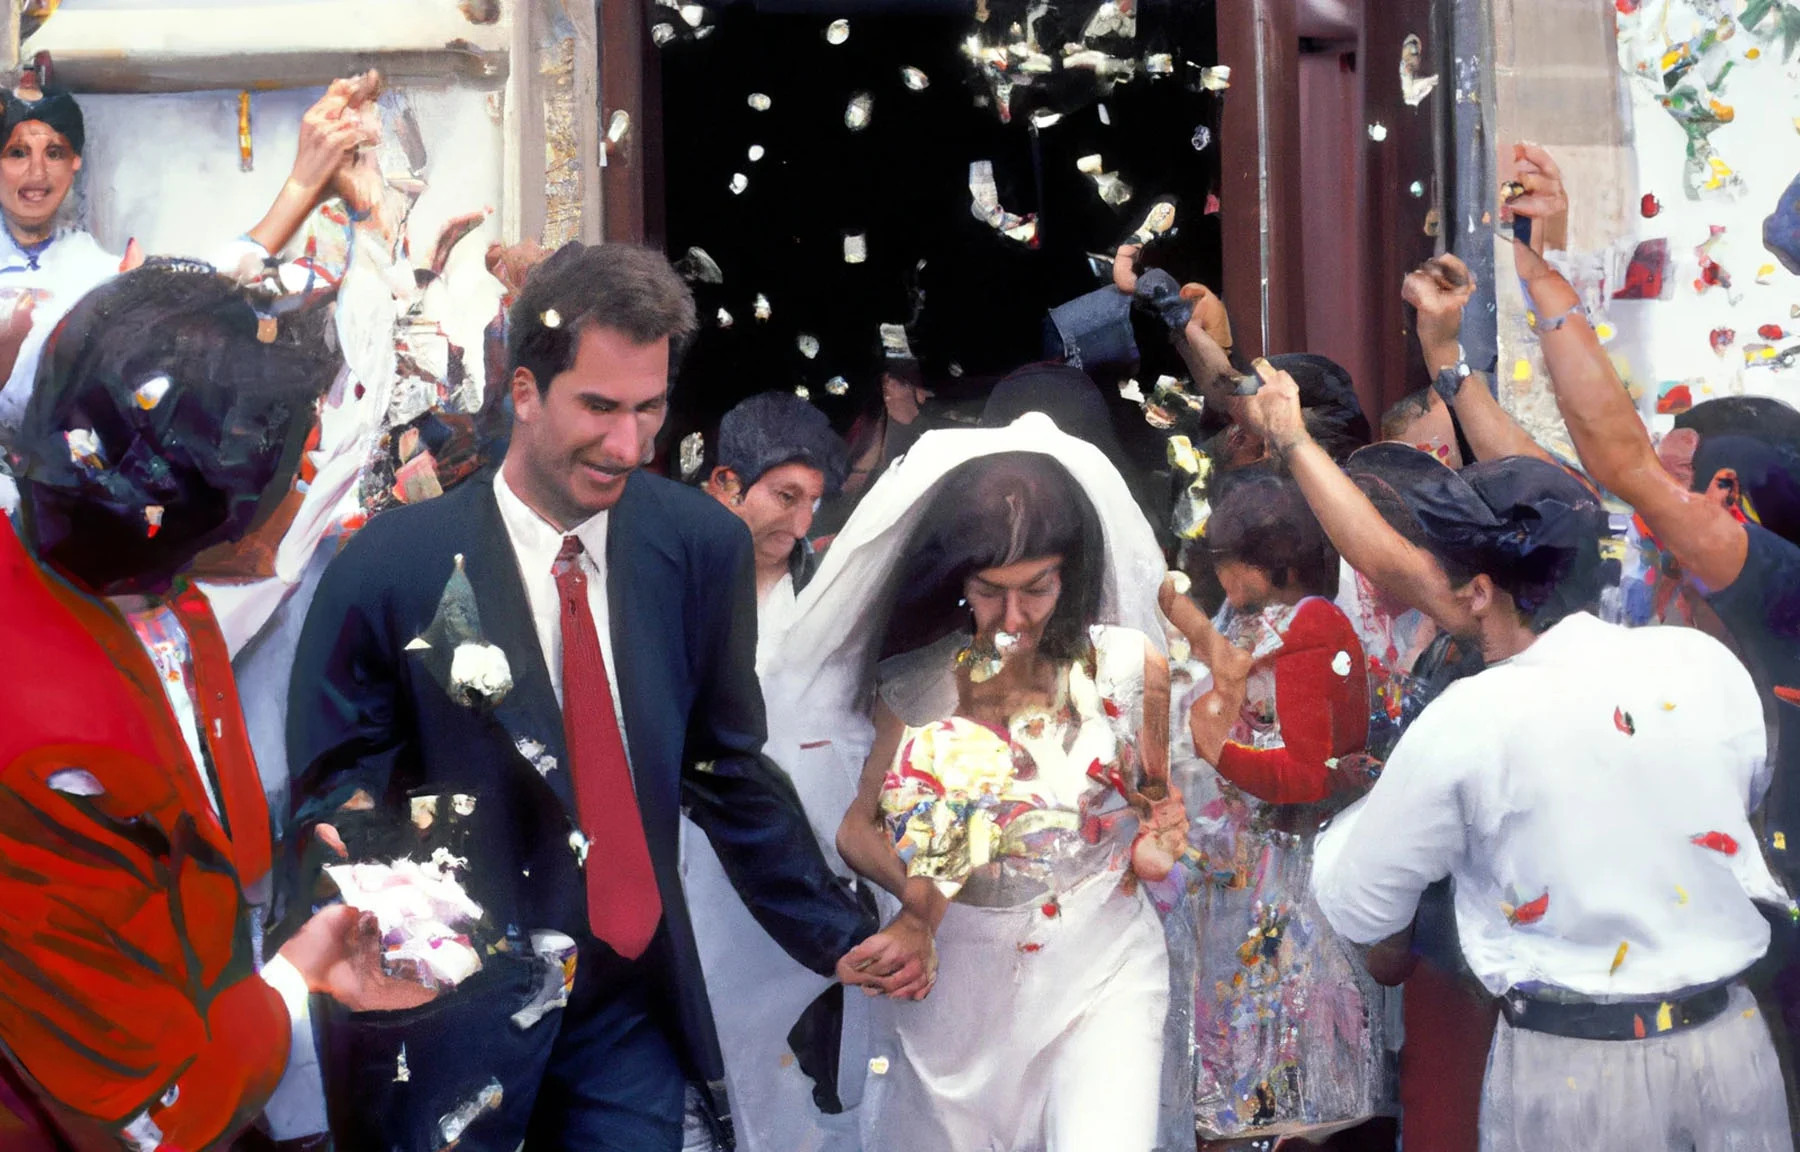 An image that looks like a photograph but is created with the use of Artificial Intelligence. The image has a 90s feel, showing a just married couple, the groom wearing a black suit and a red tie and the bride wearing a white dress and holding a bouquet of flowers, the moment they exit a church. People are gathered around the couple throwing rose petals in the air.